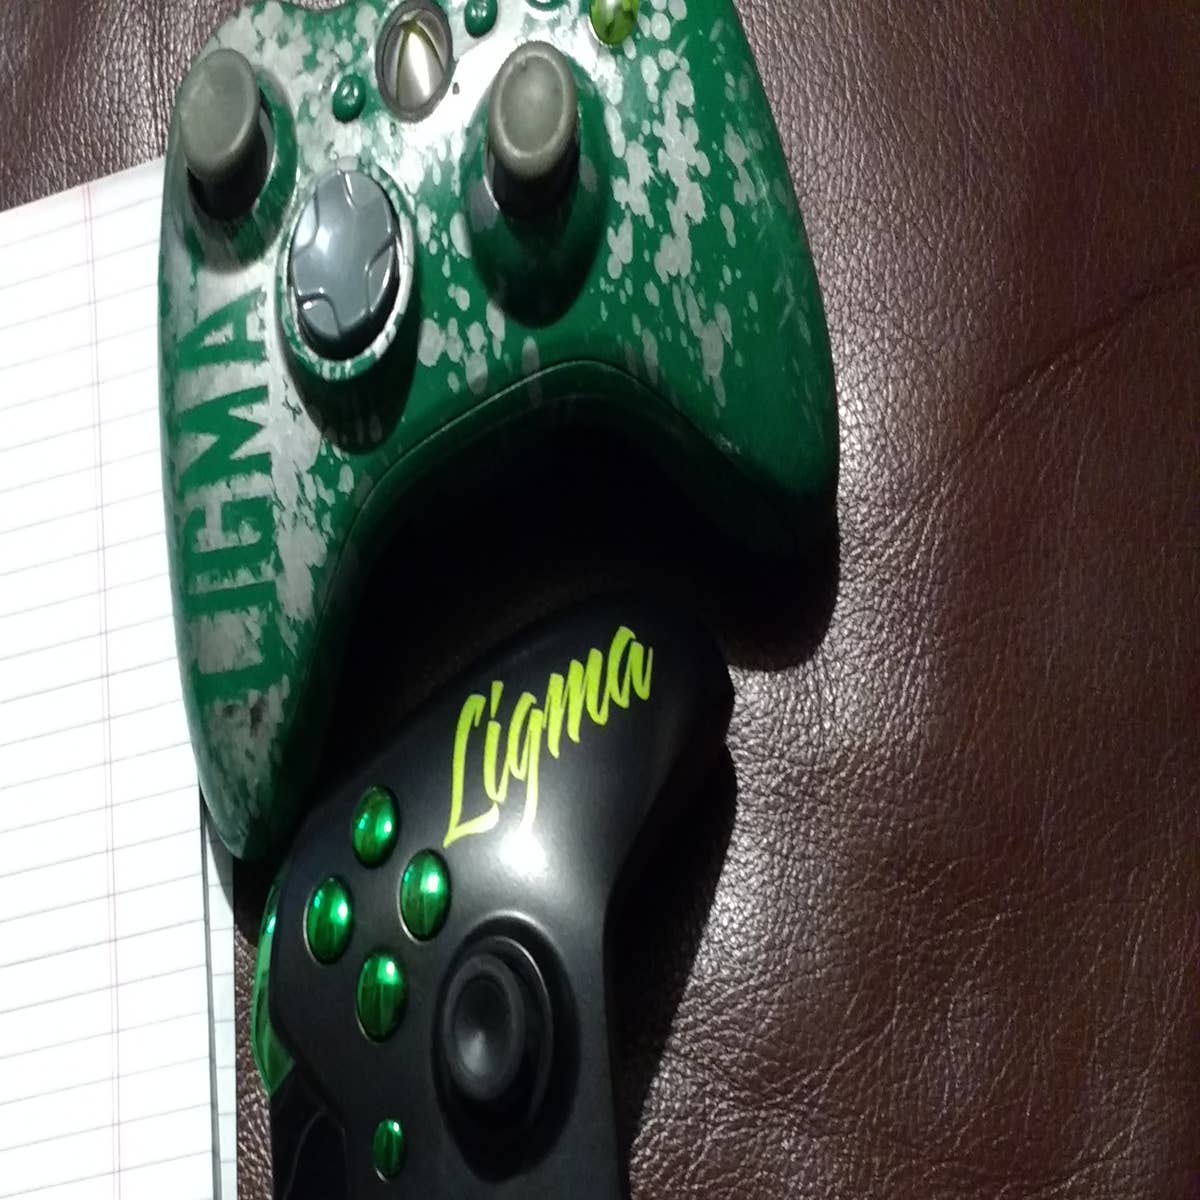 EG: Xbox fan says ligma meme destroyed his 12-year-old gamertag, Page 3